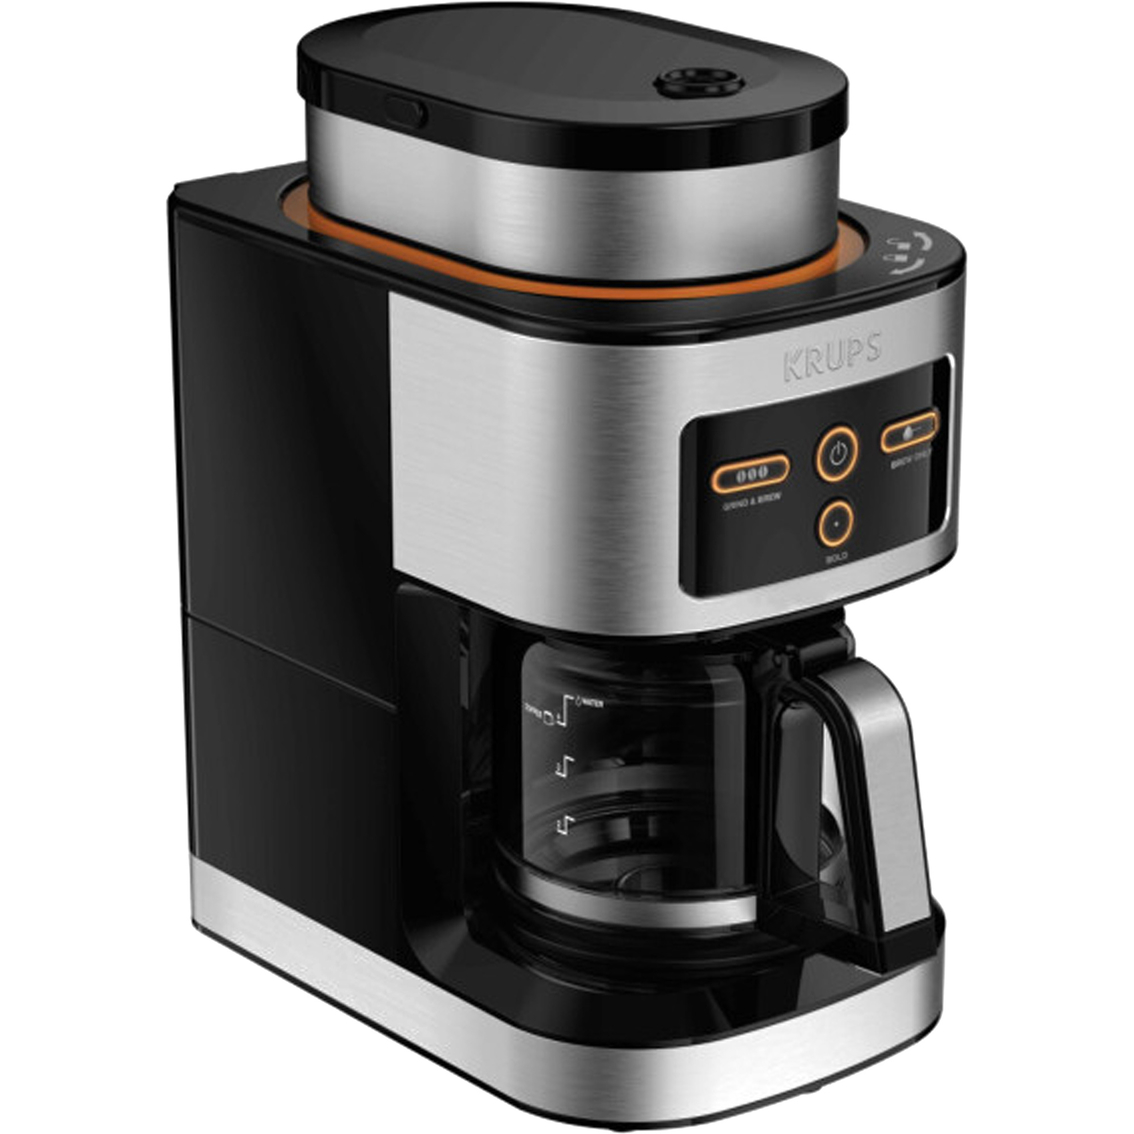 Krups Km550d50 Personal Cafe Grind And Brew 4 Cup Coffee Maker